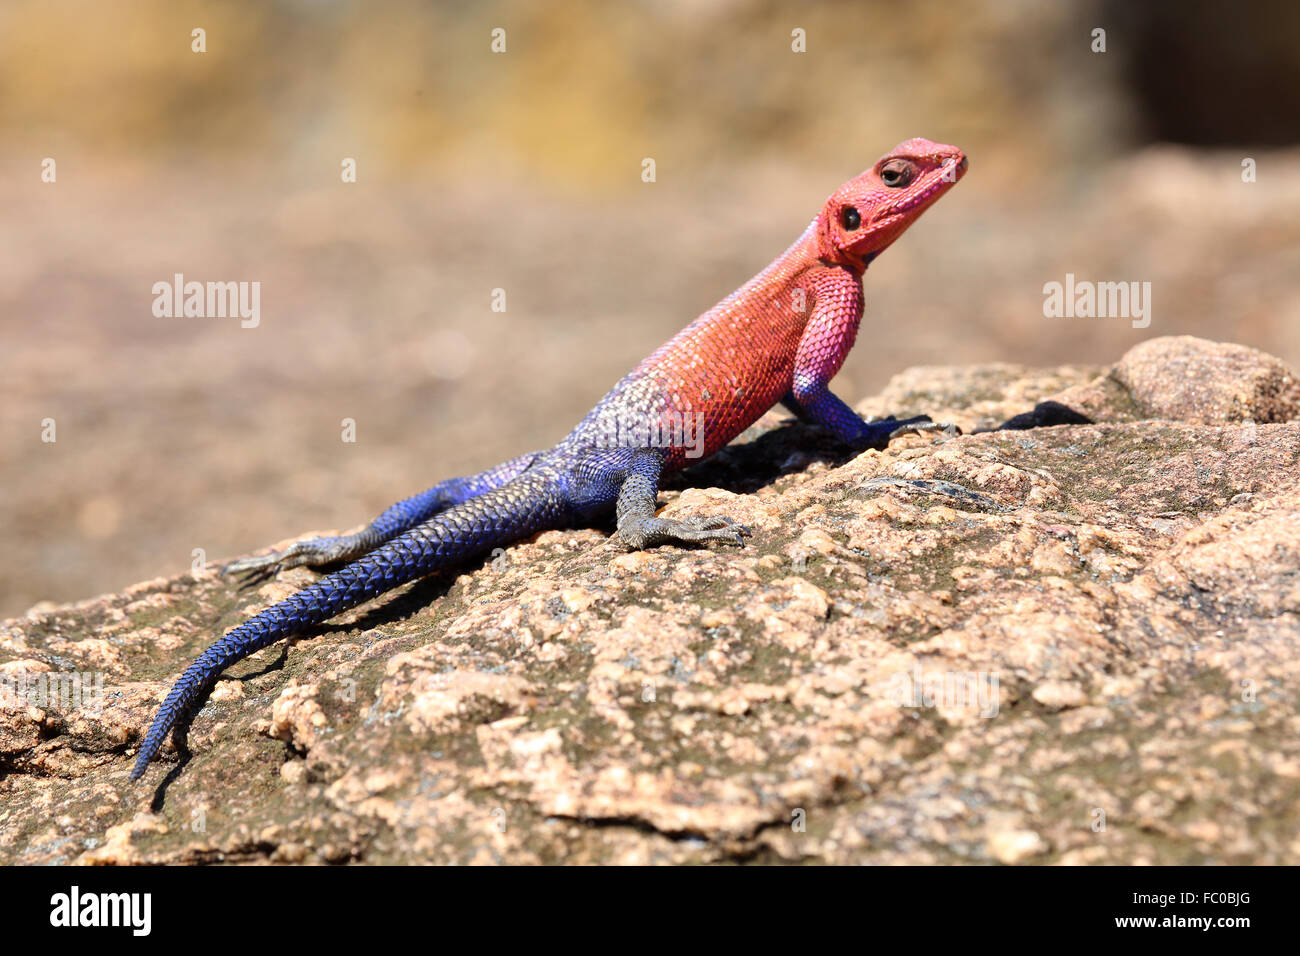 Red And Blue Gecko Stock Photo - Alamy